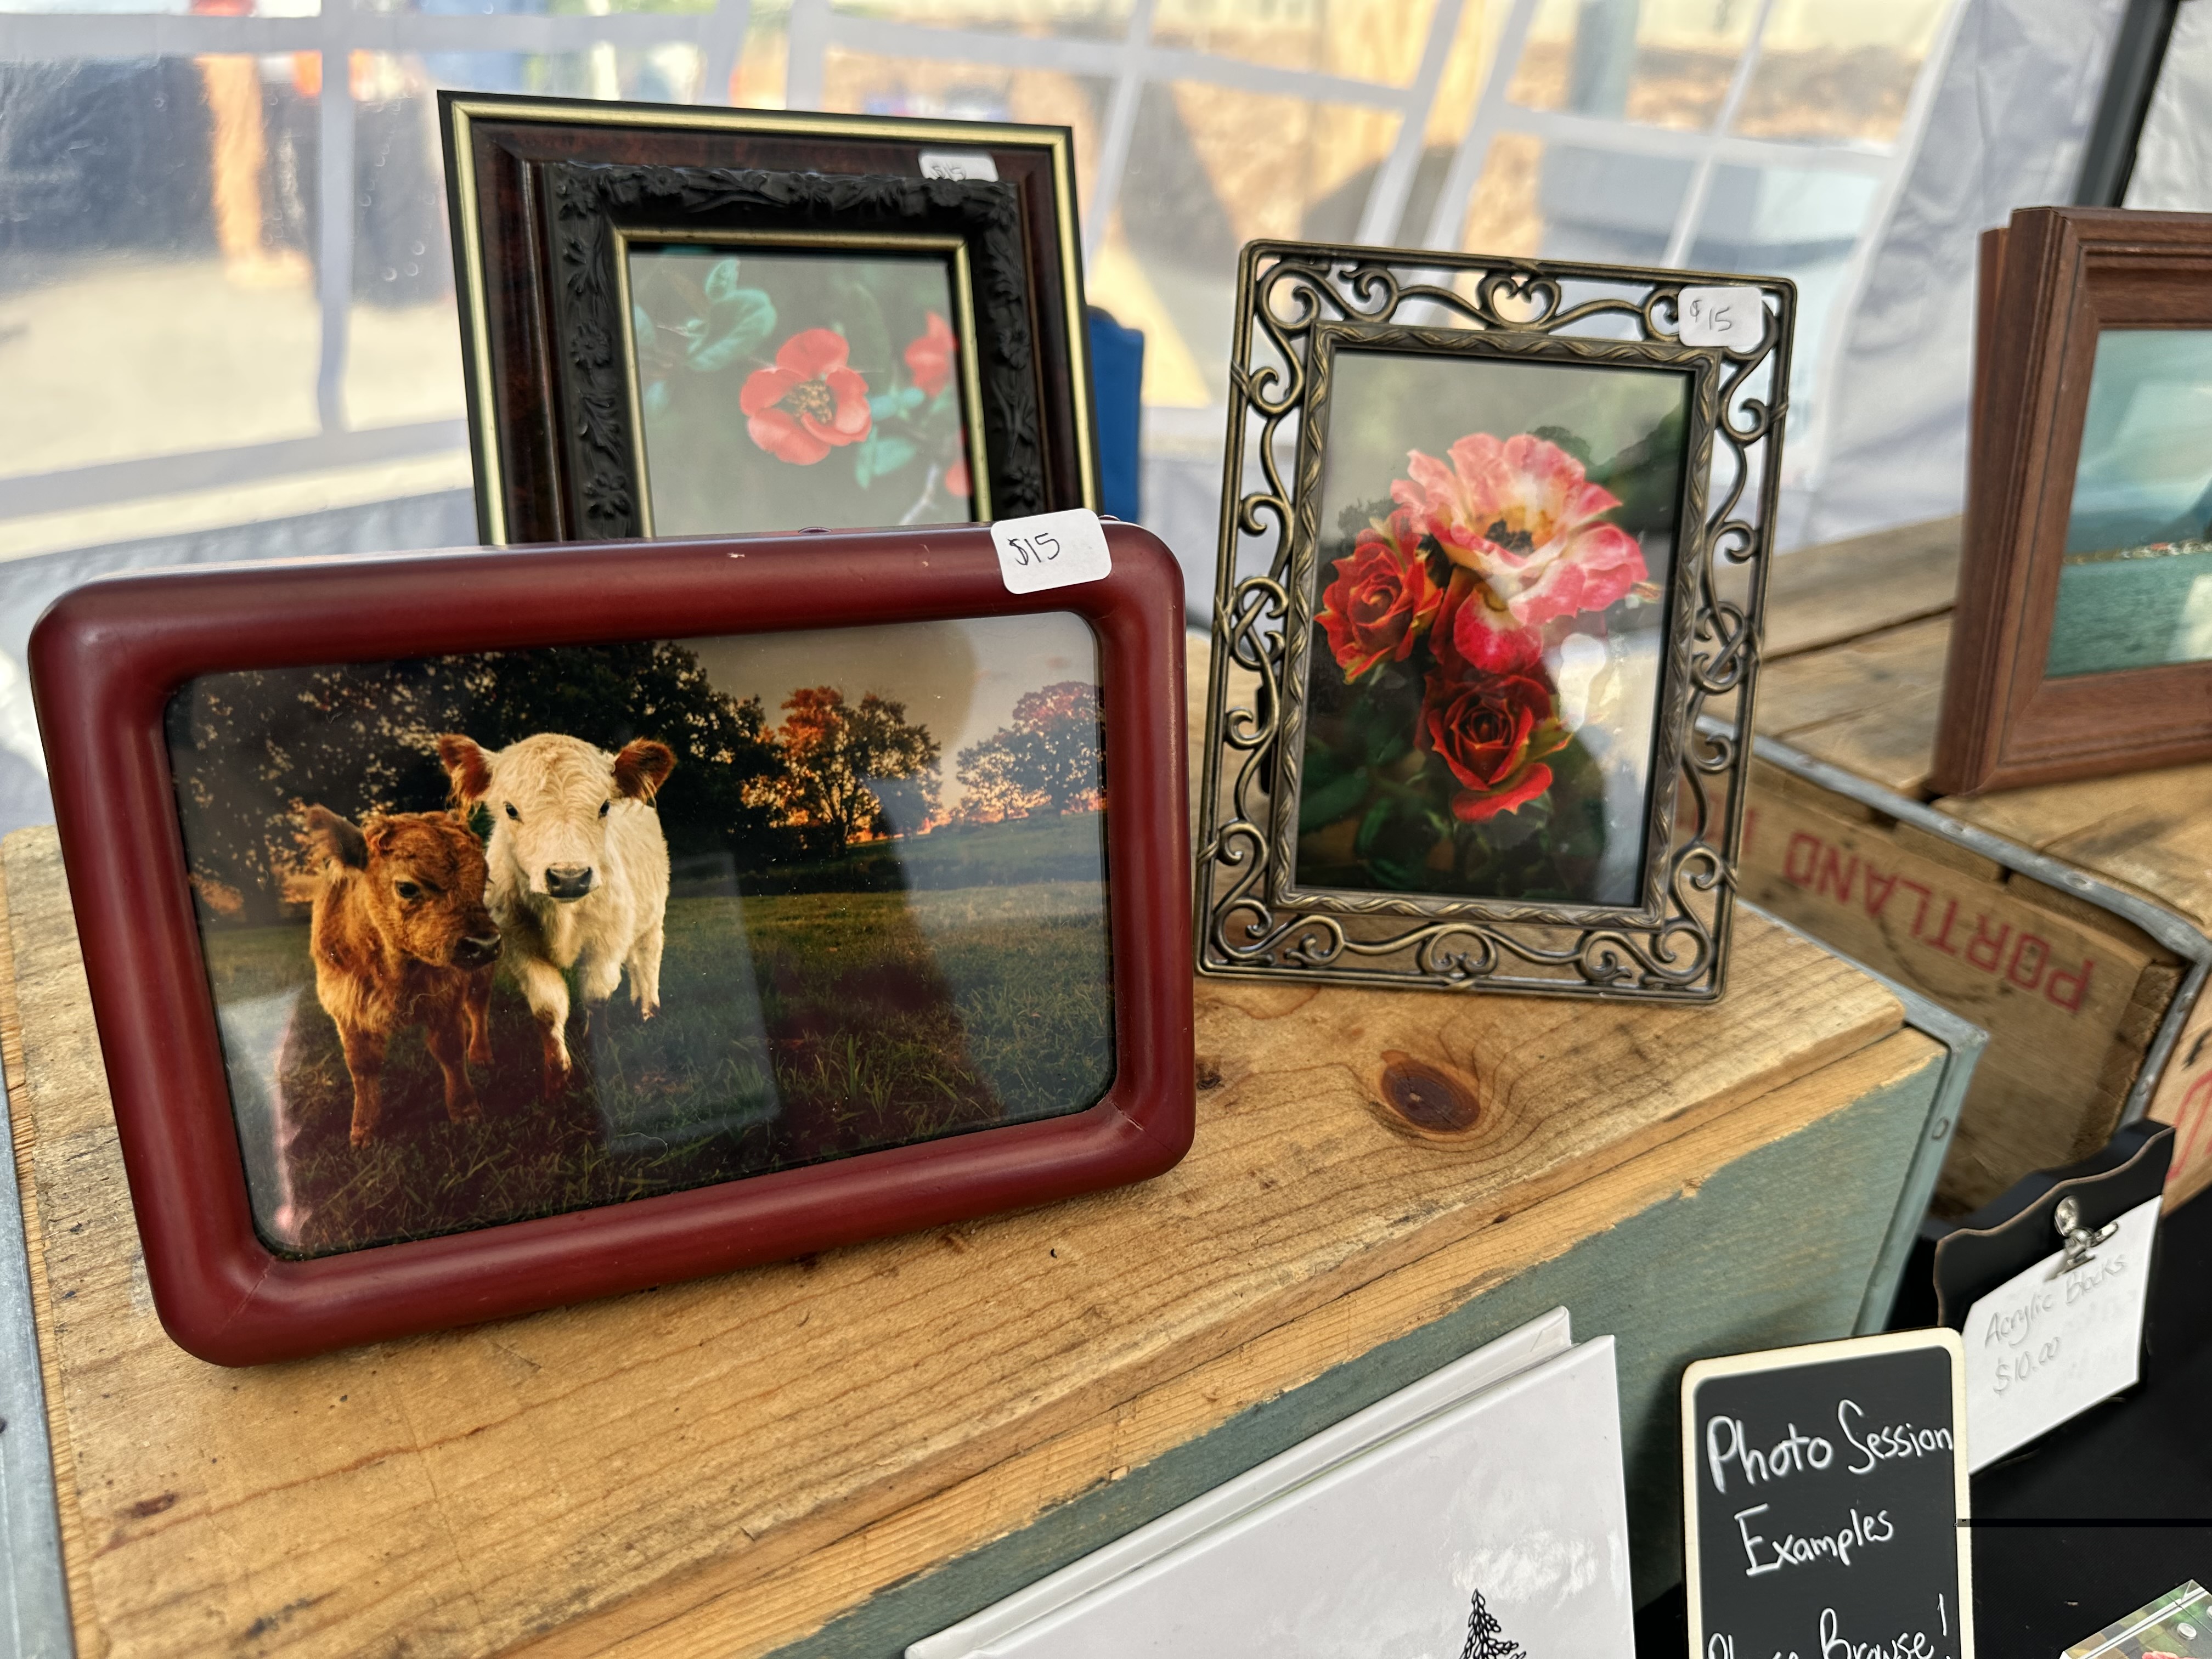 Three framed photographs sit on a wooden table top